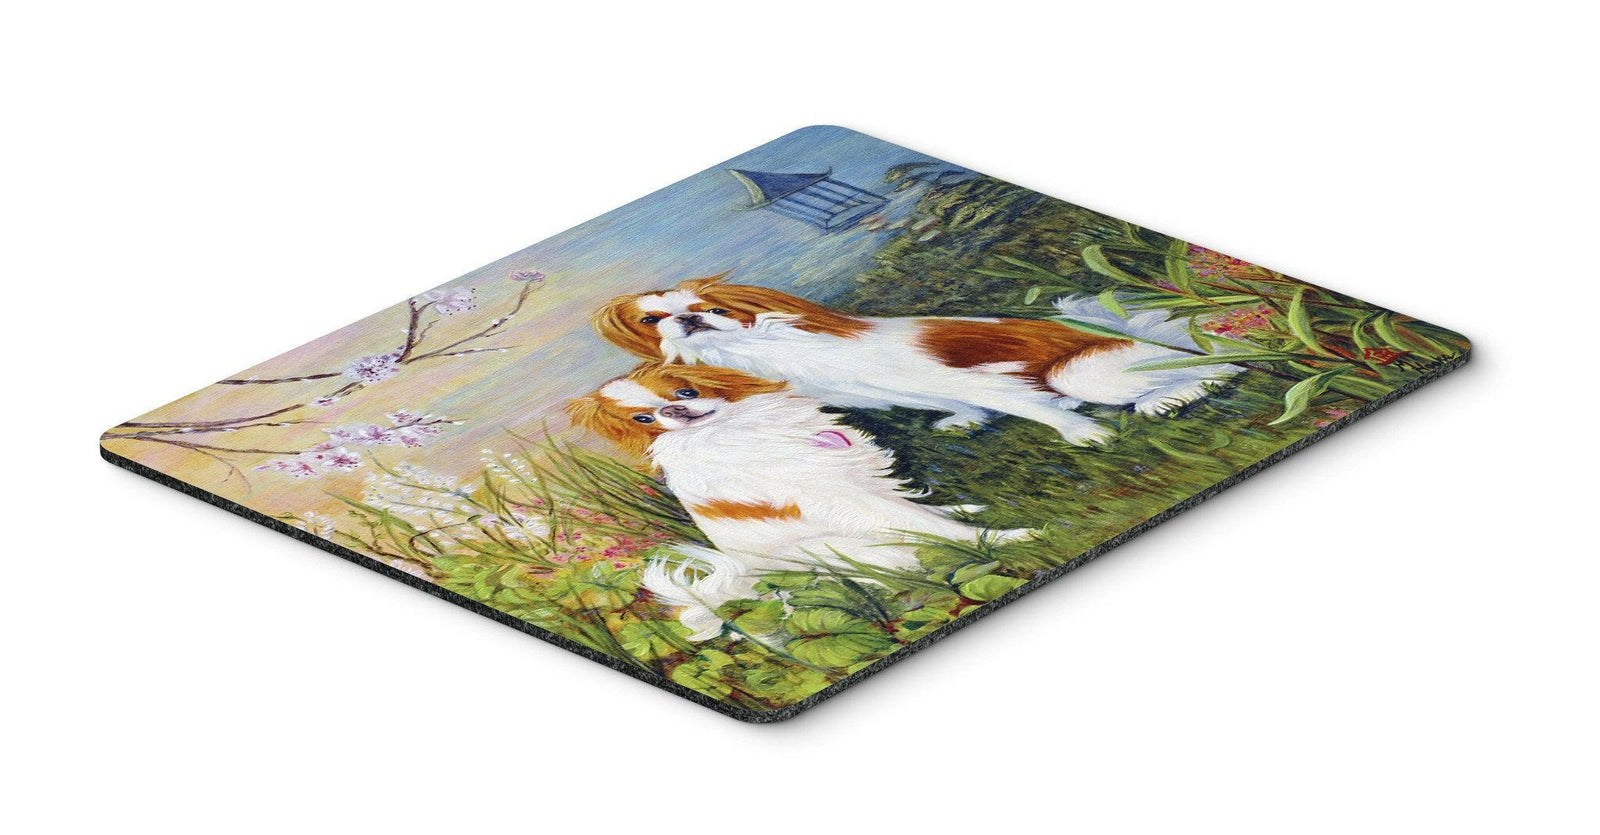 Japanese Chin Wasabi and Ginger Mouse Pad, Hot Pad or Trivet MH1061MP by Caroline's Treasures